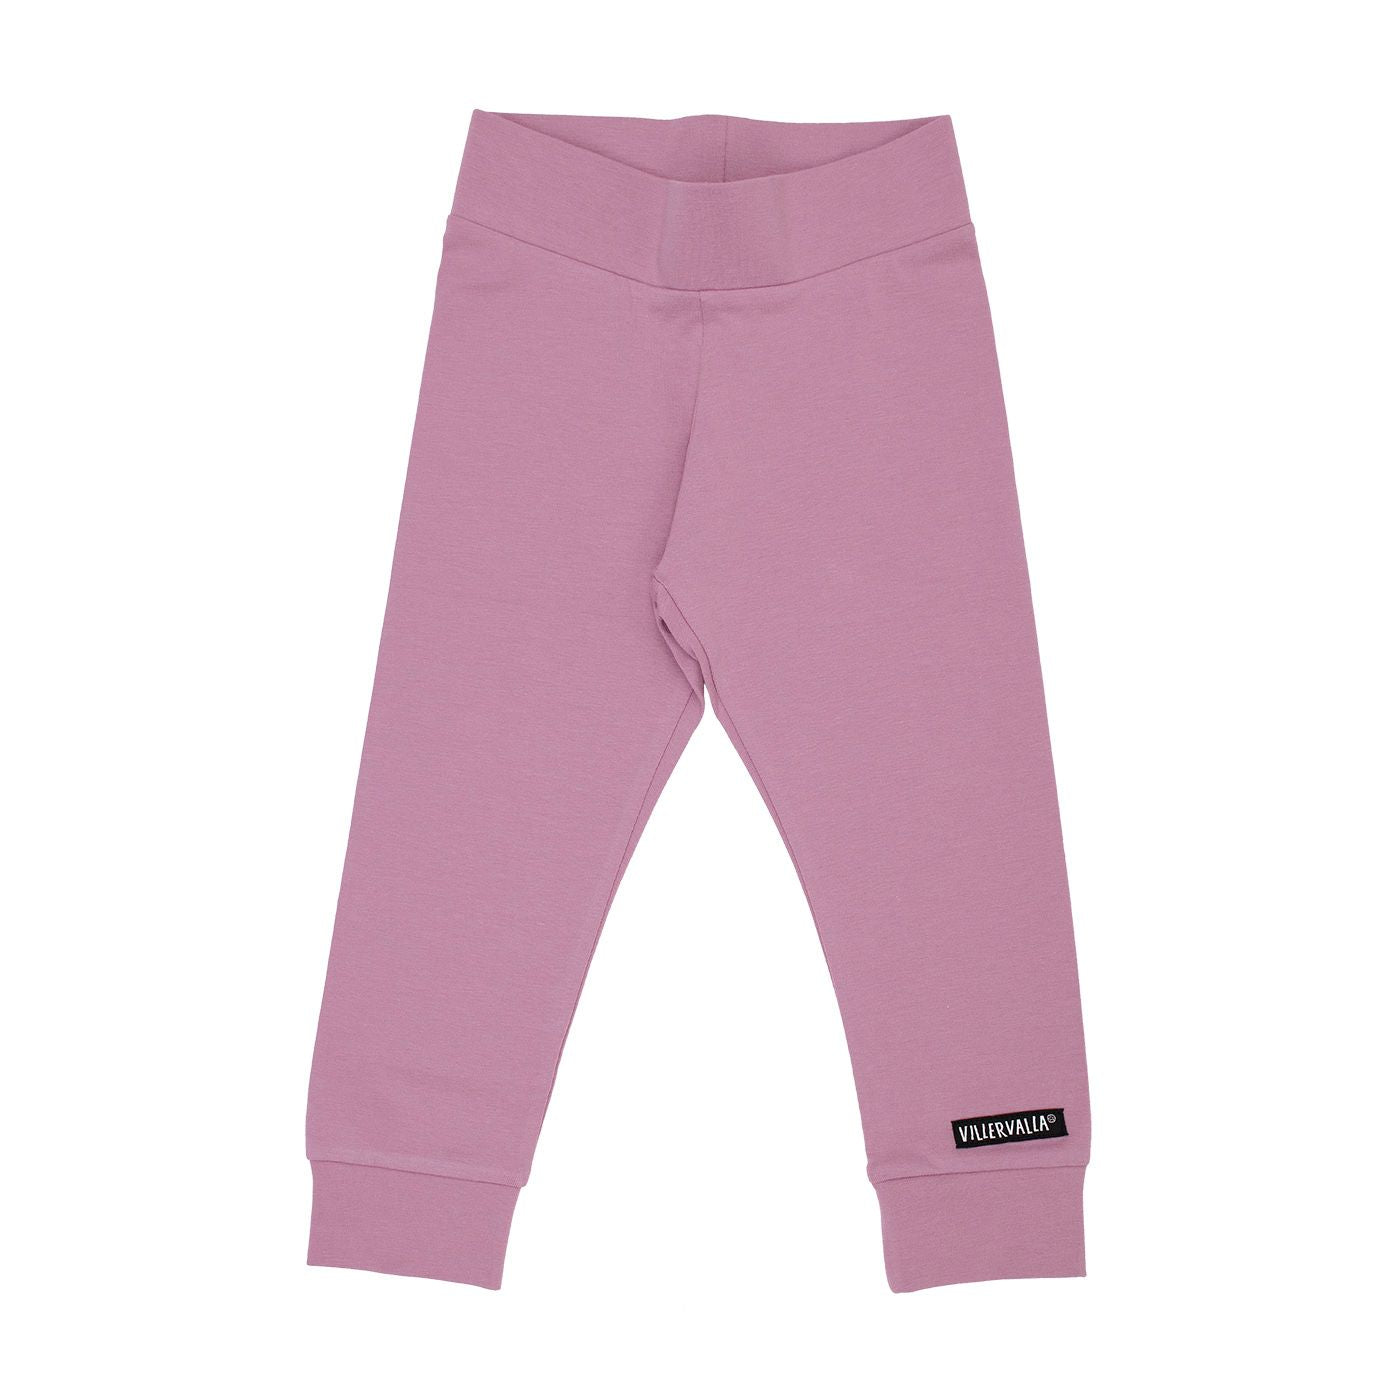 Tapered Trousers - Smoothie - 2 Left Size 8-9 & 9-10 years-Villervalla-Modern Rascals